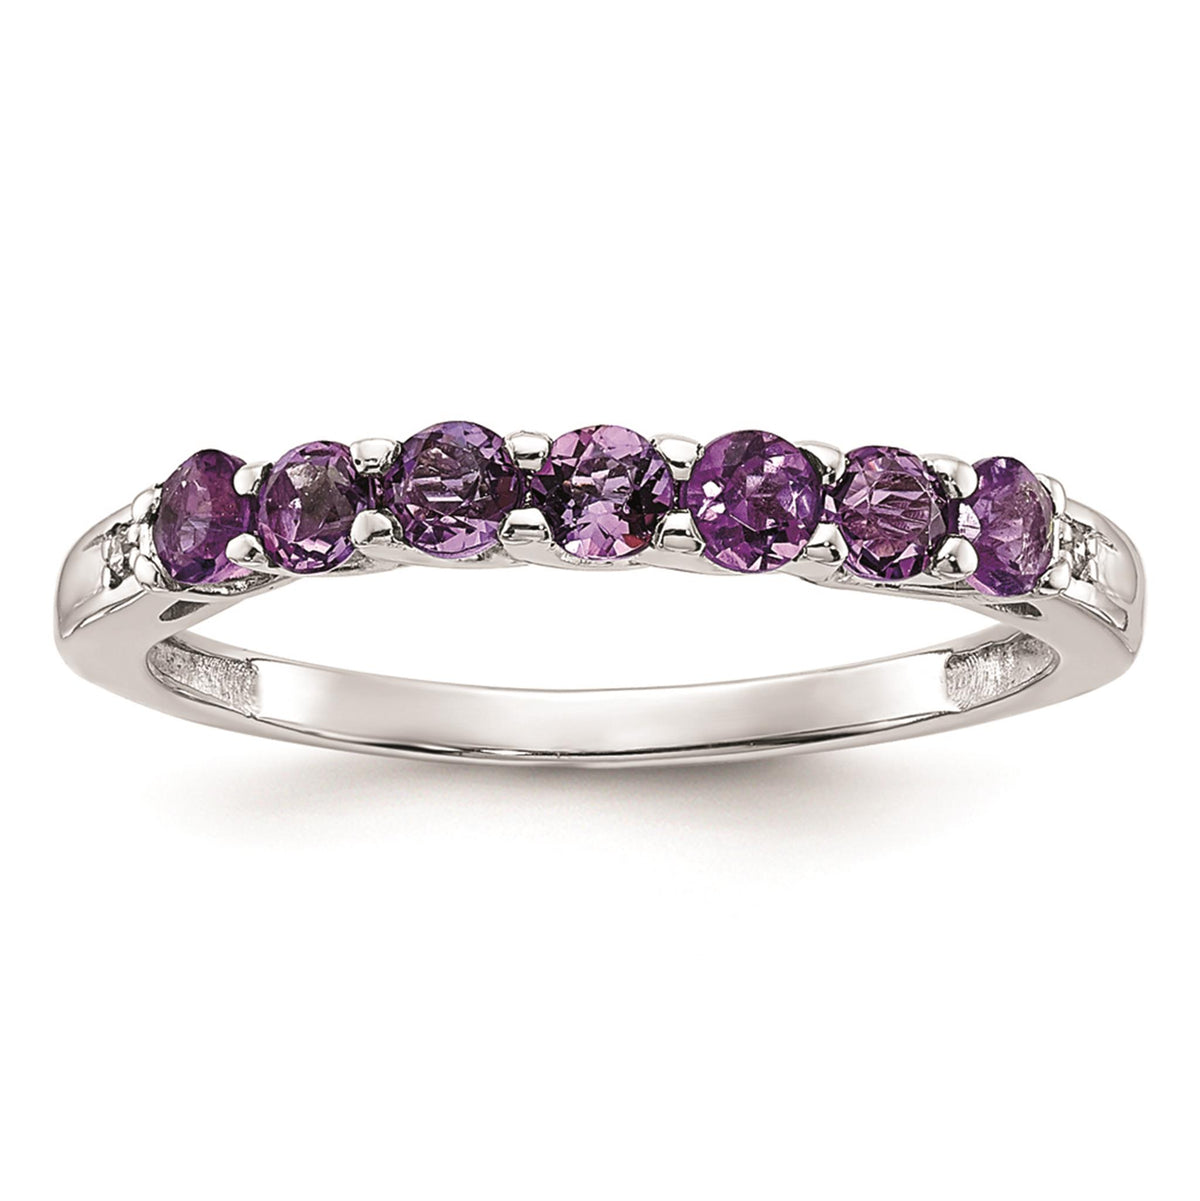 10Kt White Gold Stackable Gemstone Ring With Amethysts